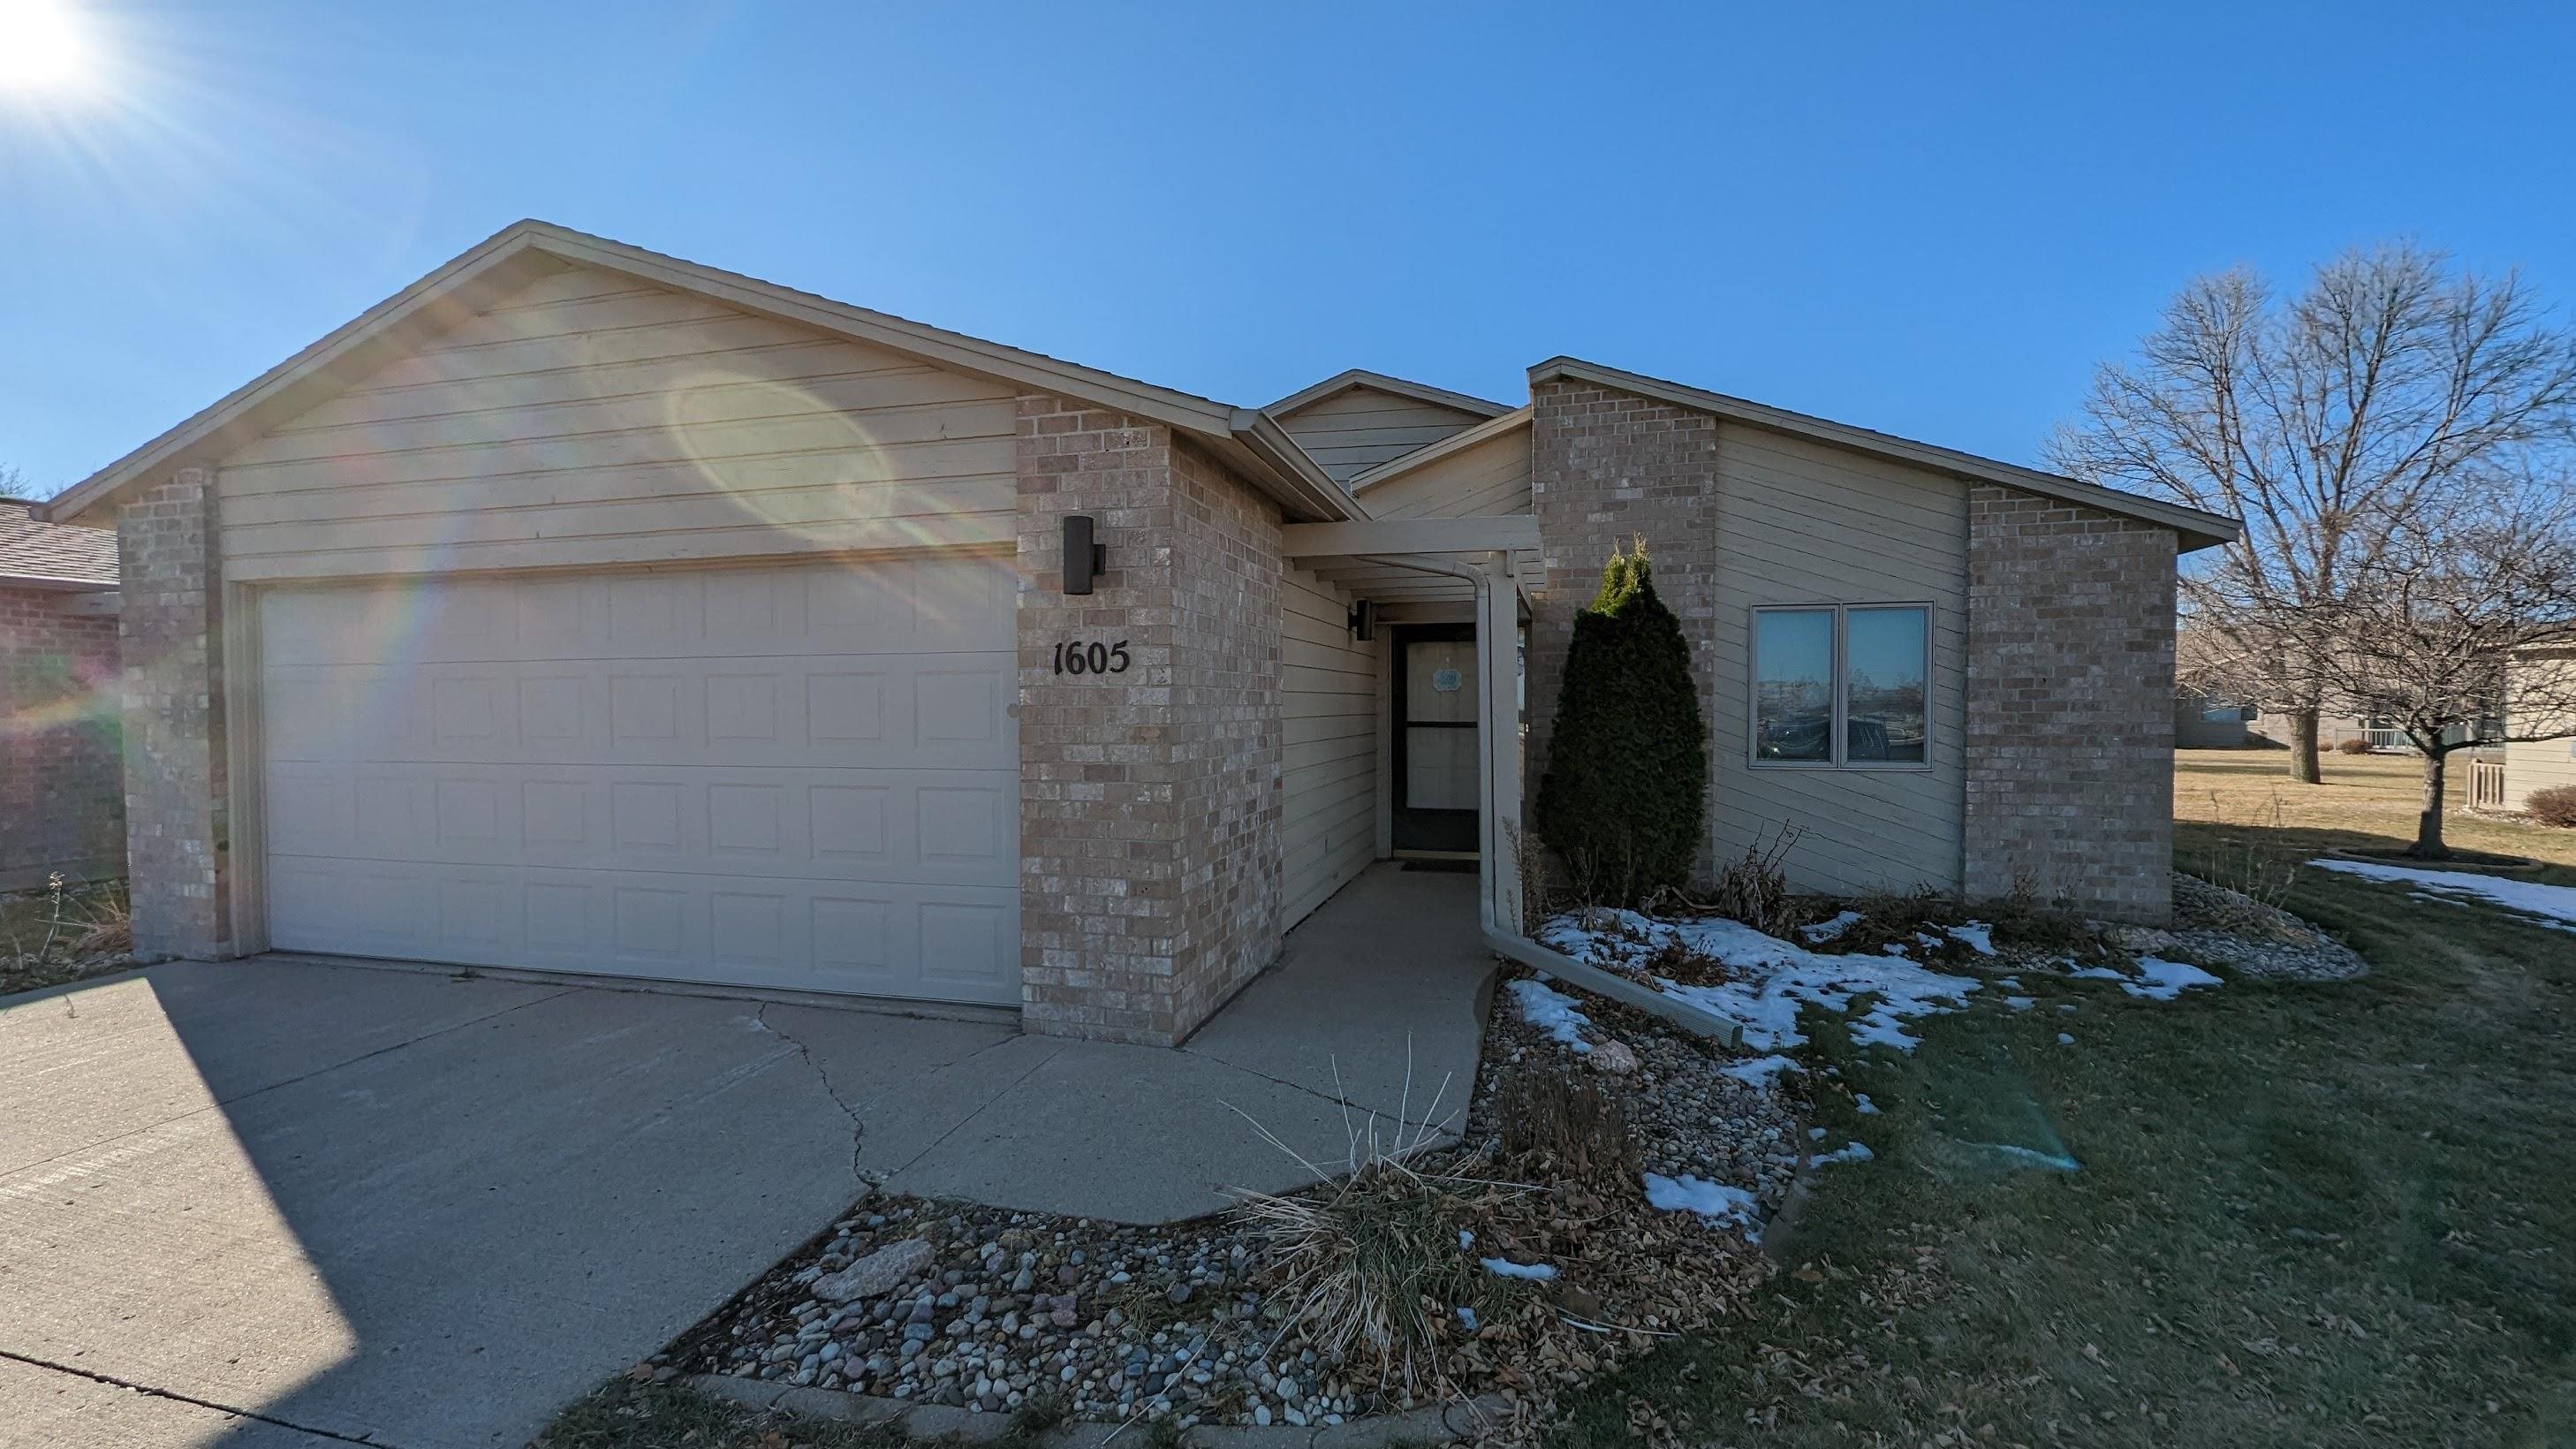 1605 11th Ave West #C, Spencer, IA 51301 